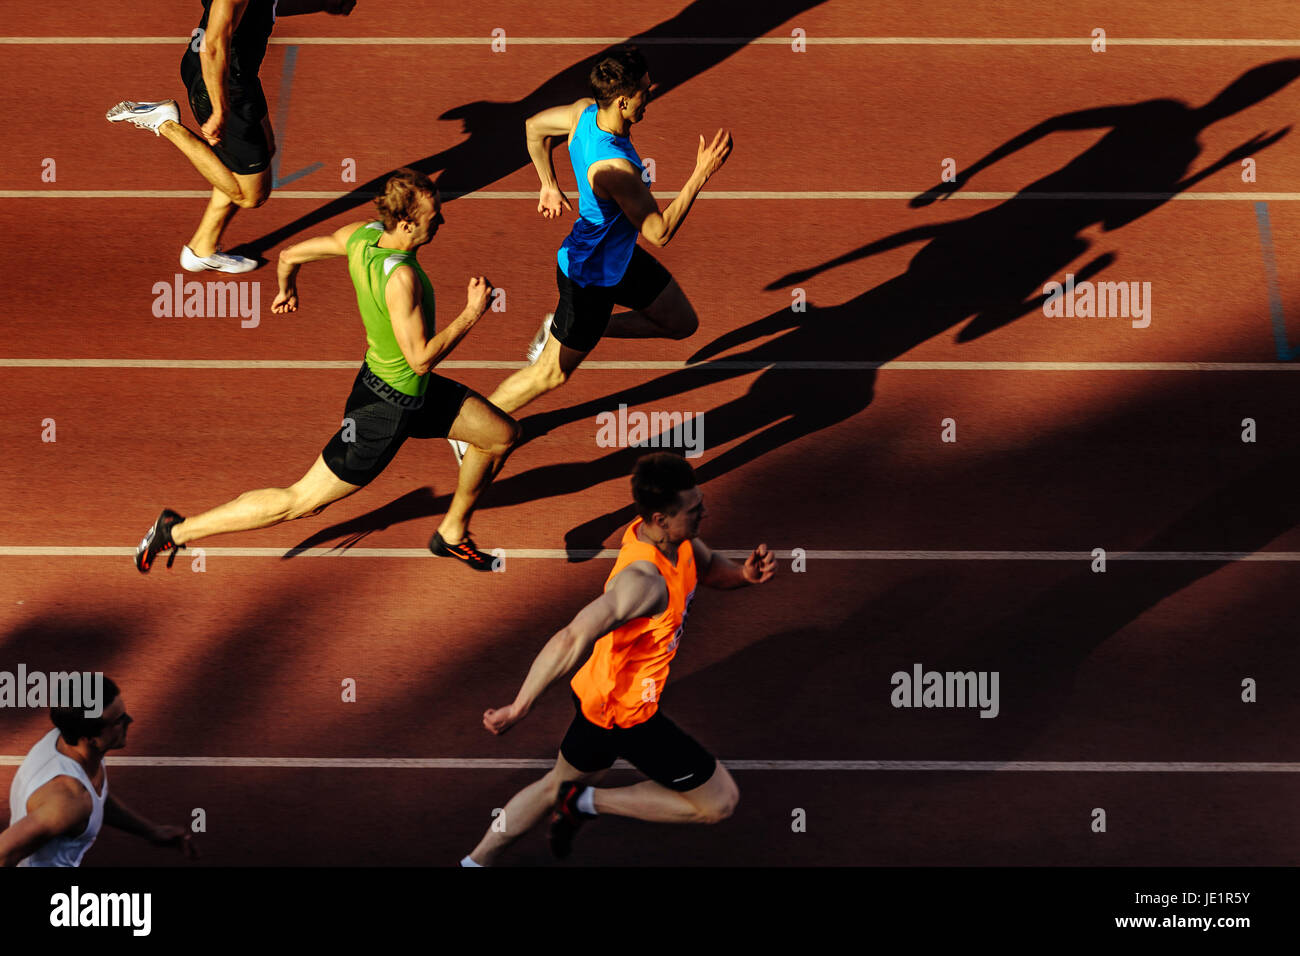 44,200 Athletes Running Motion On Track Images, Stock Photos, 3D